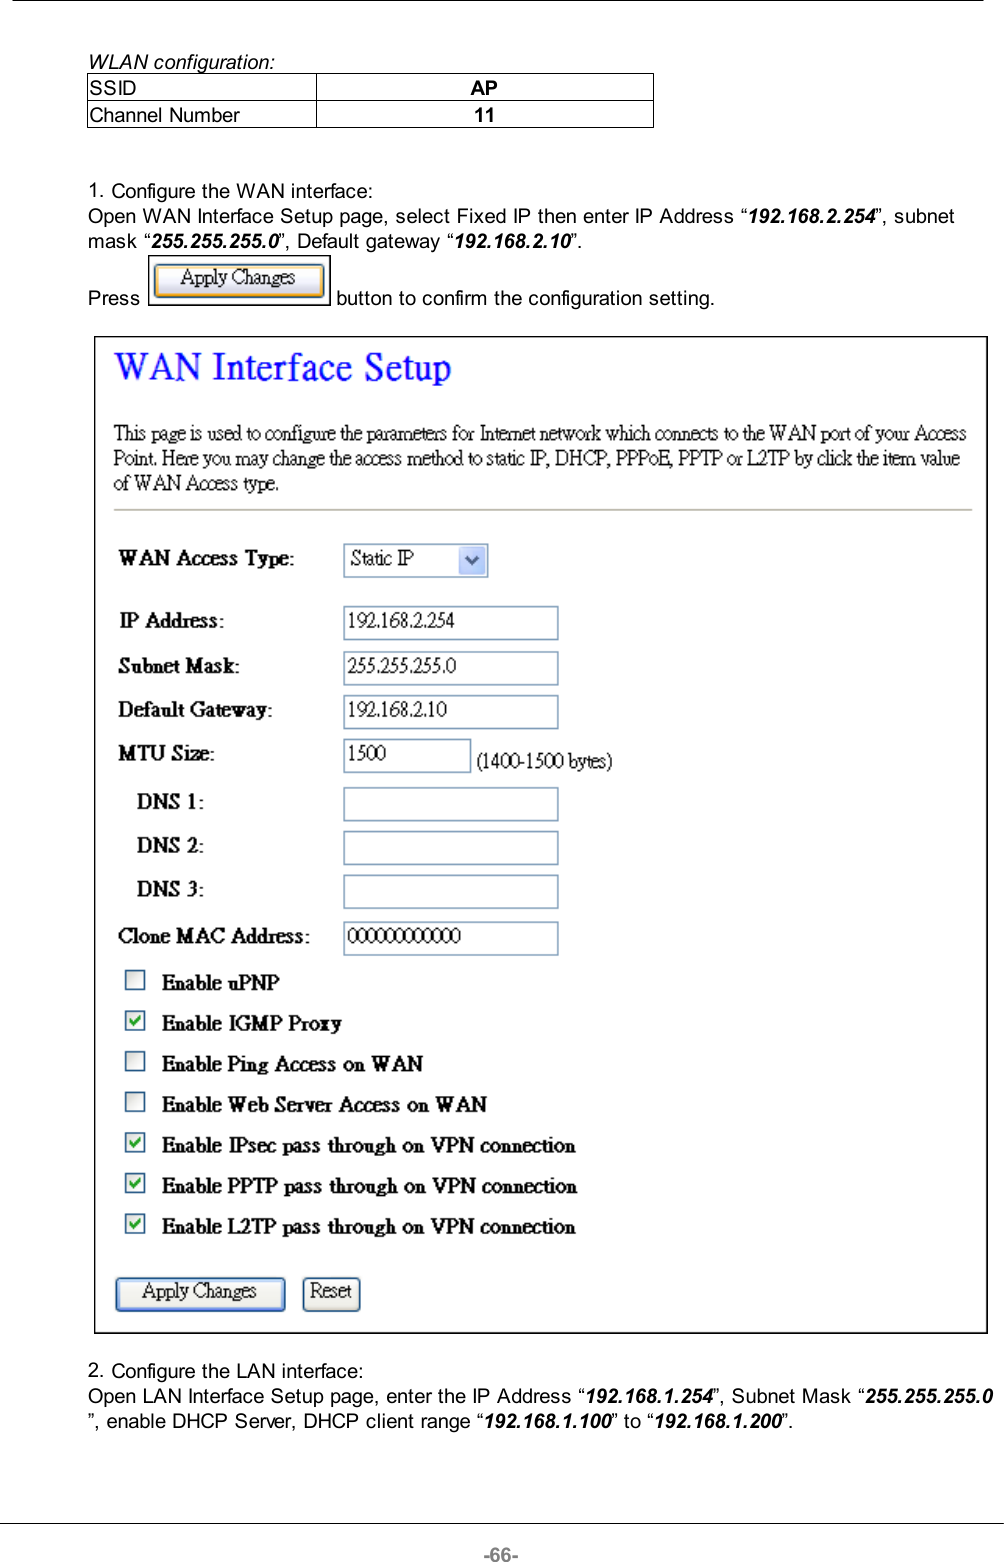 -66-WLAN configuration:SSIDAPChannel Number111. Configure the WAN interface:Open WAN Interface Setup page, select Fixed IP then enter IP Address “192.168.2.254”, subnetmask “255.255.255.0”, Default gateway “192.168.2.10”. Press   button to confirm the configuration setting.2. Configure the LAN interface:Open LAN Interface Setup page, enter the IP Address “192.168.1.254”, Subnet Mask “255.255.255.0”, enable DHCP Server, DHCP client range “192.168.1.100” to “192.168.1.200”.